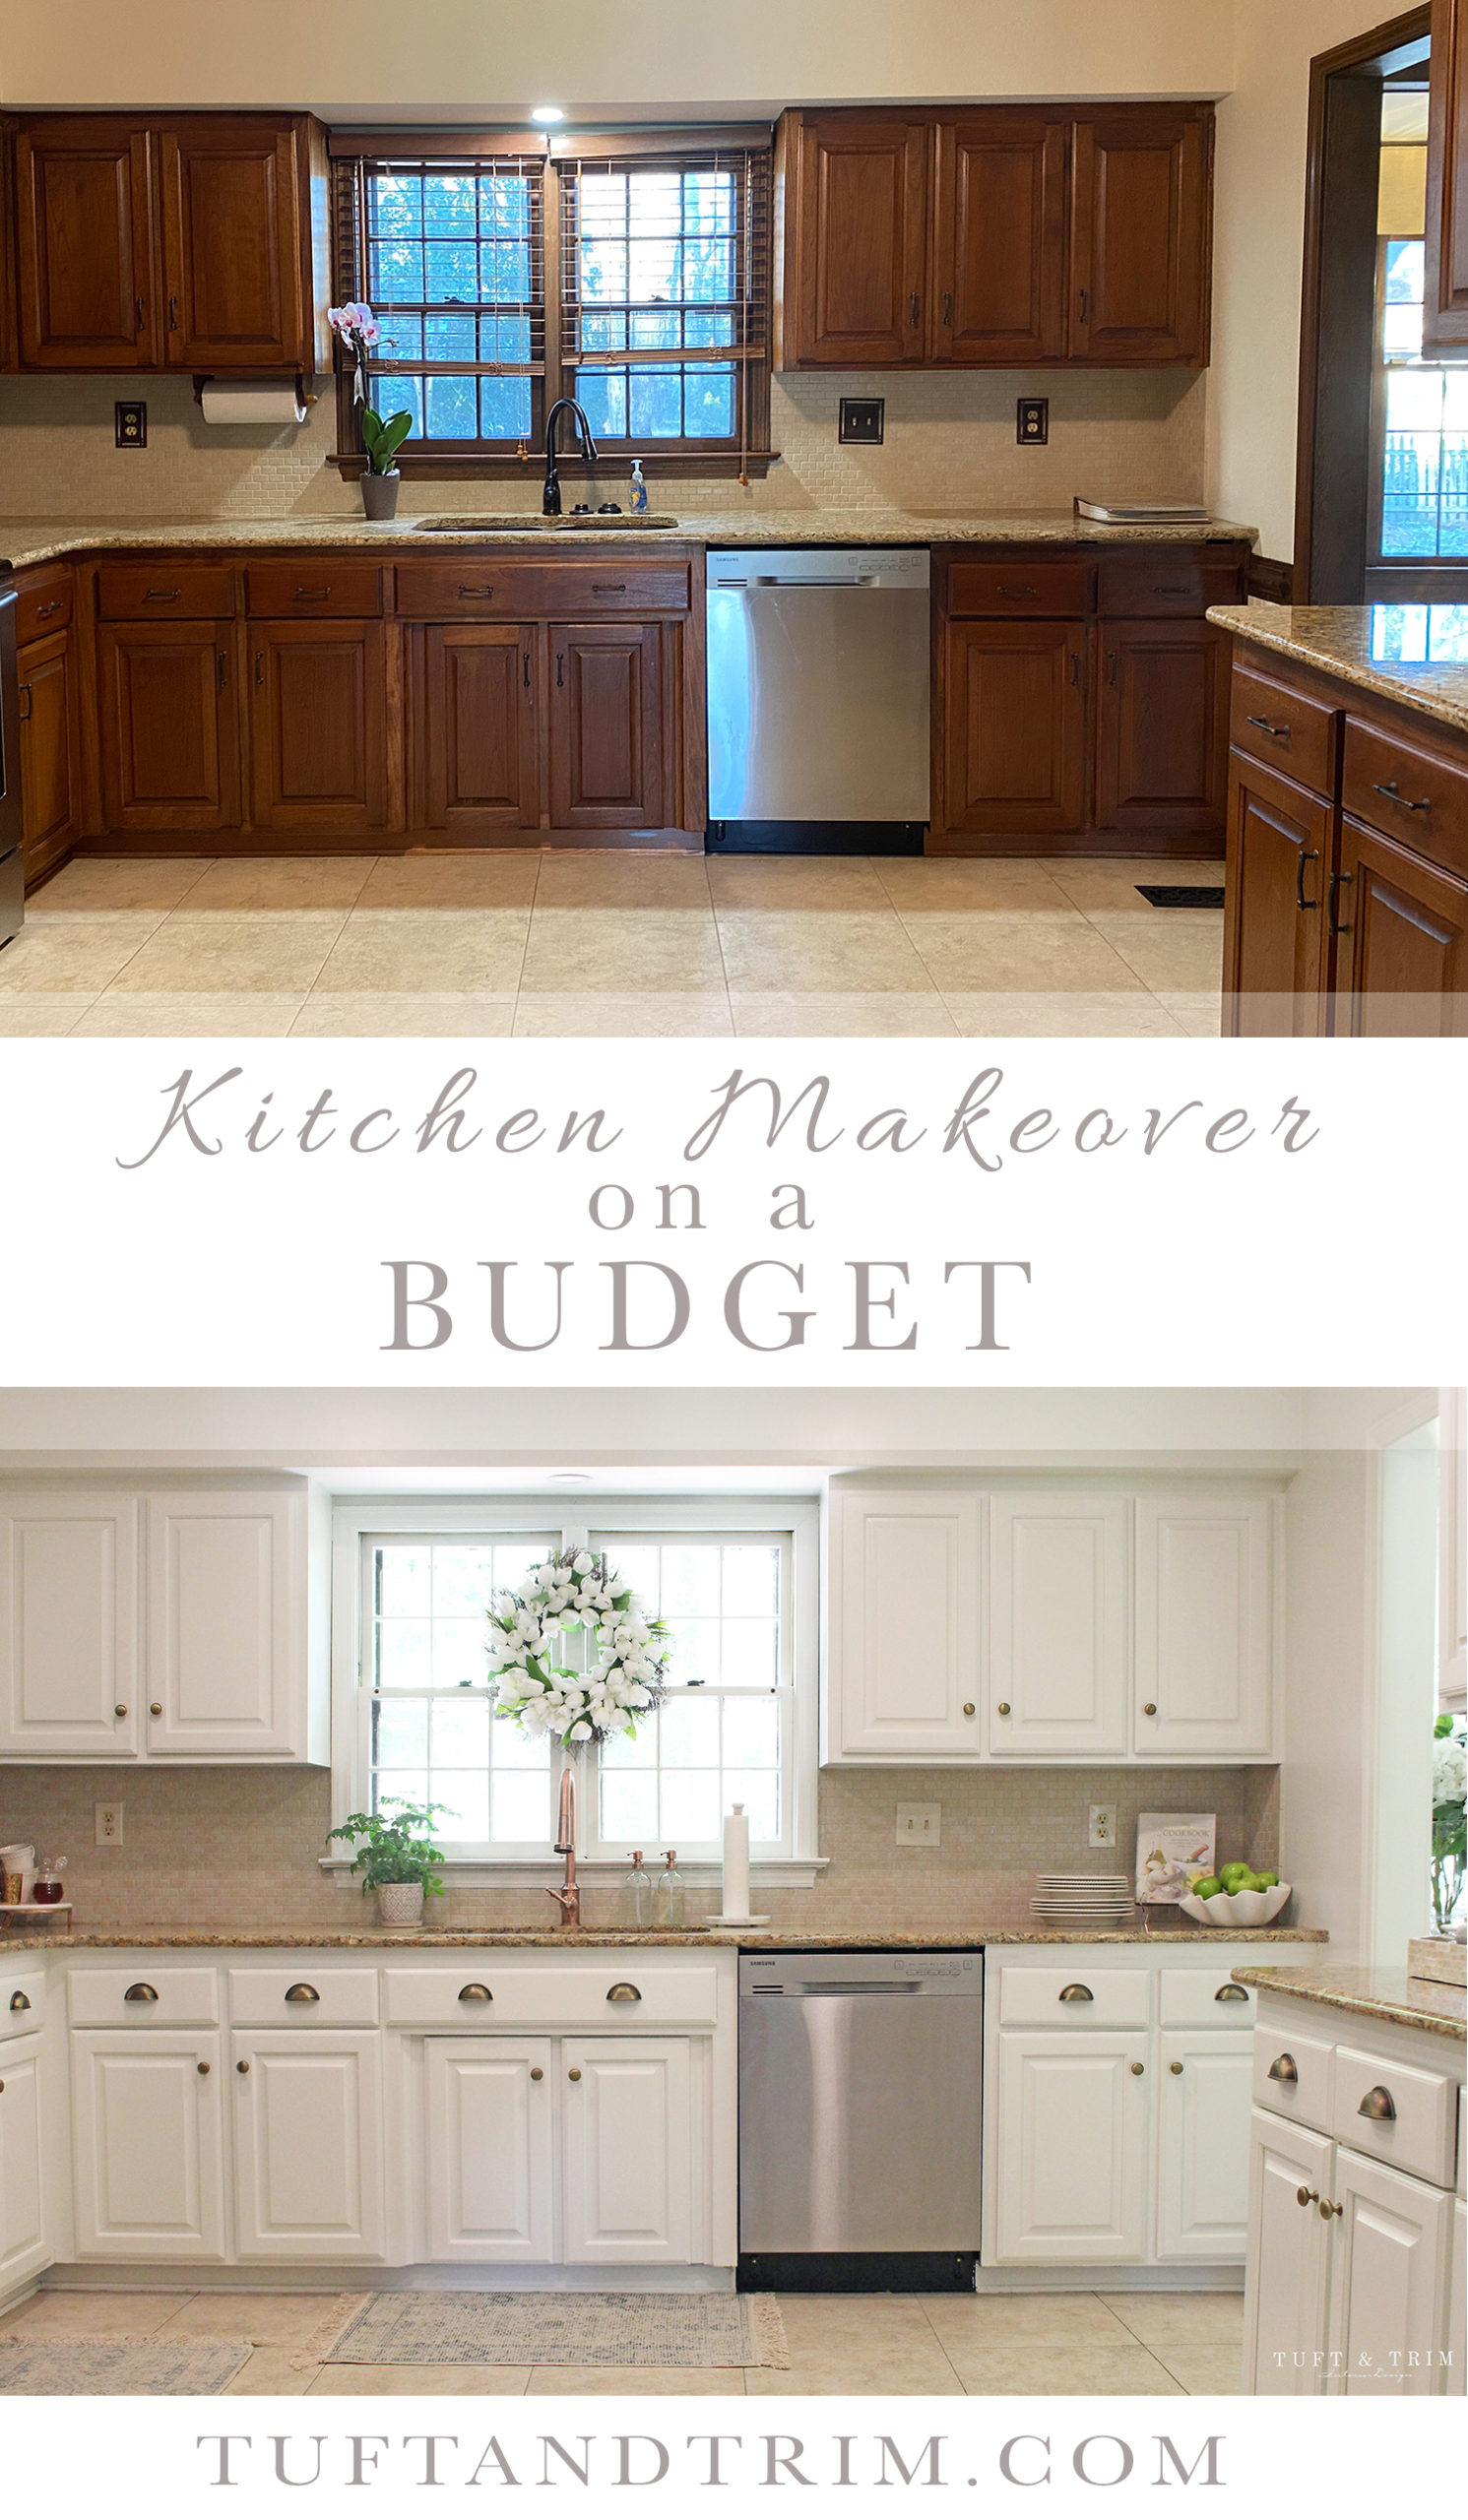 Kitchen Makeover on a Budget: Before & After